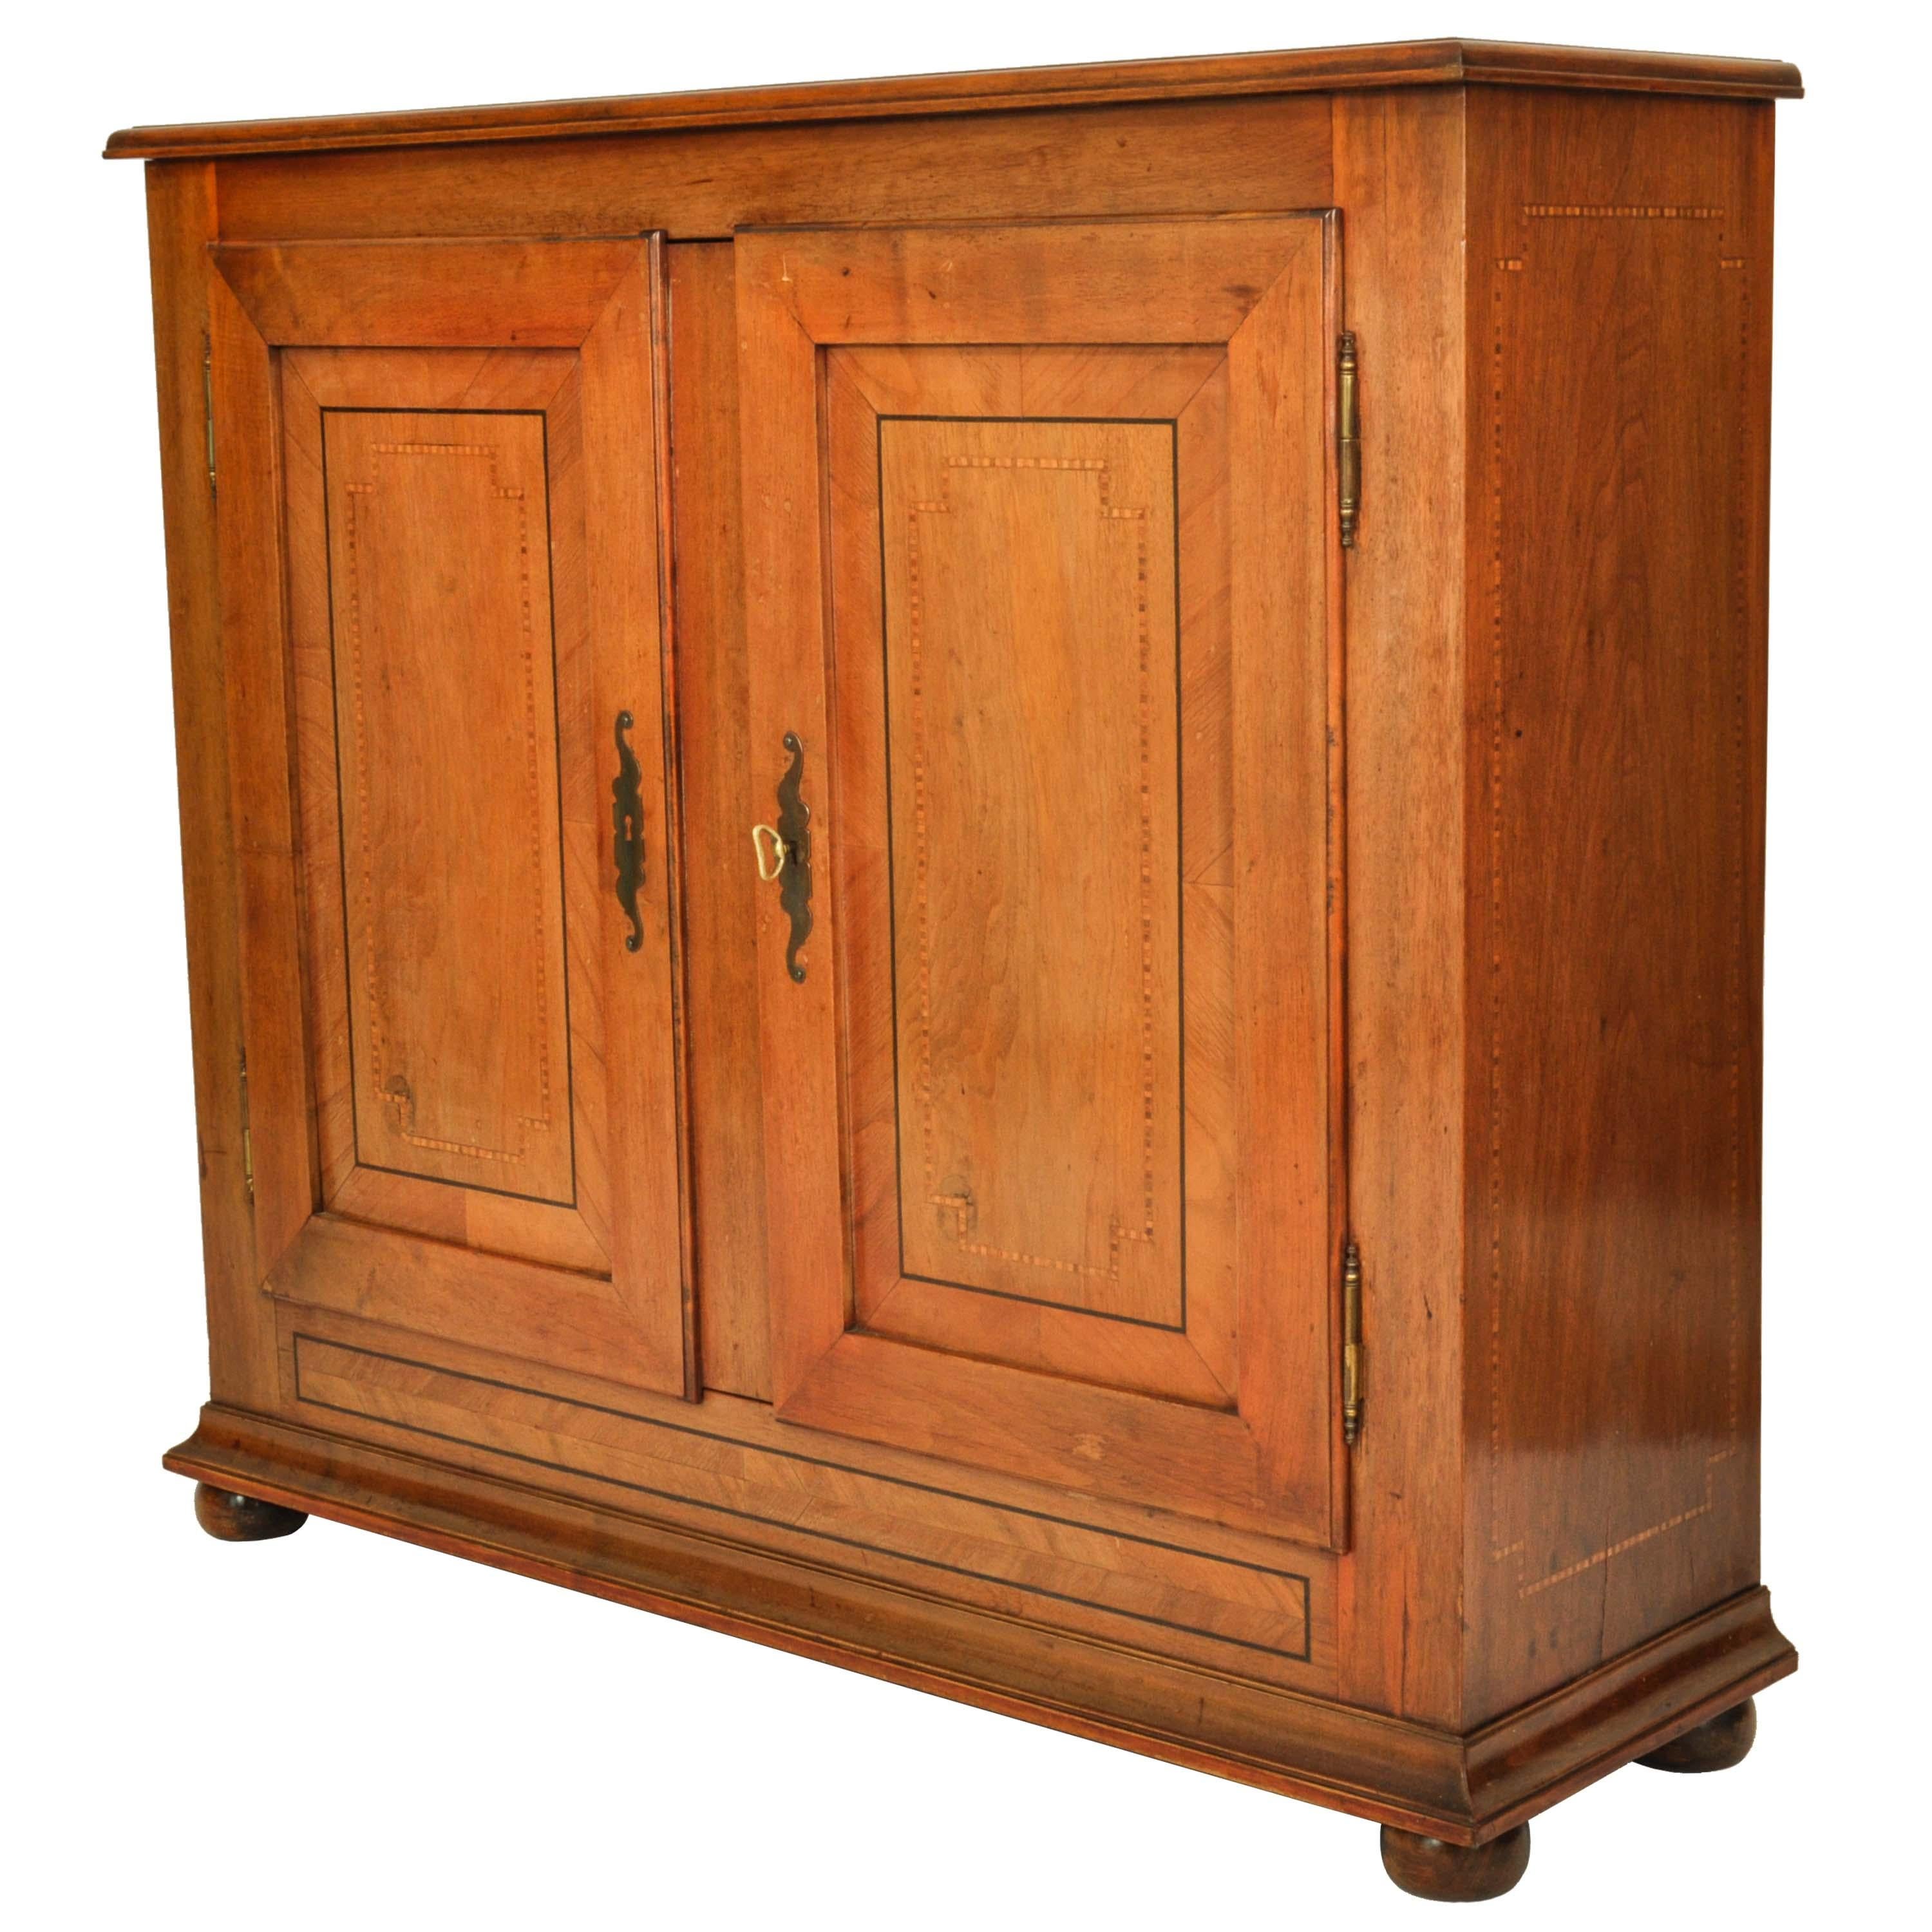 Inlay Antique French Provincial Louis XV Inlaid Cherry Side Cabinet Buffet, Circa 1820